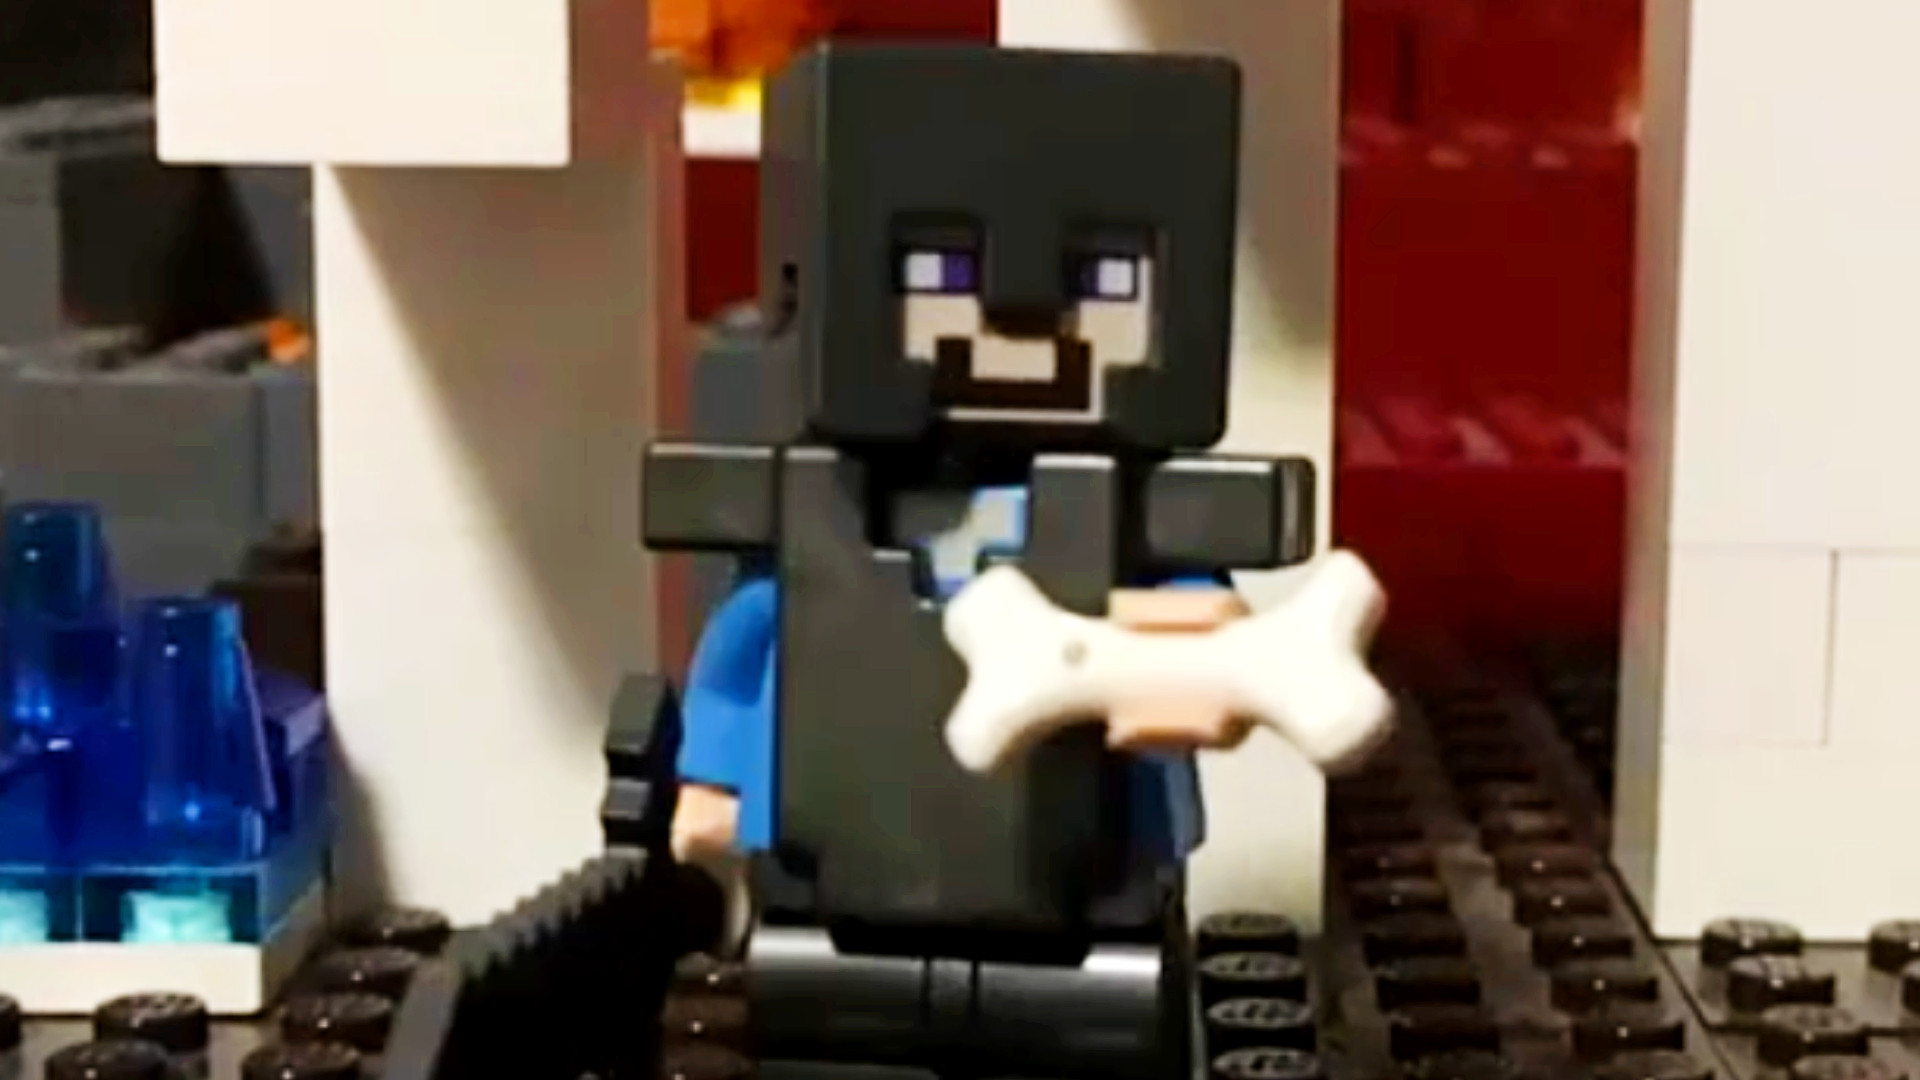 This Lego Minecraft stop motion short is adorable